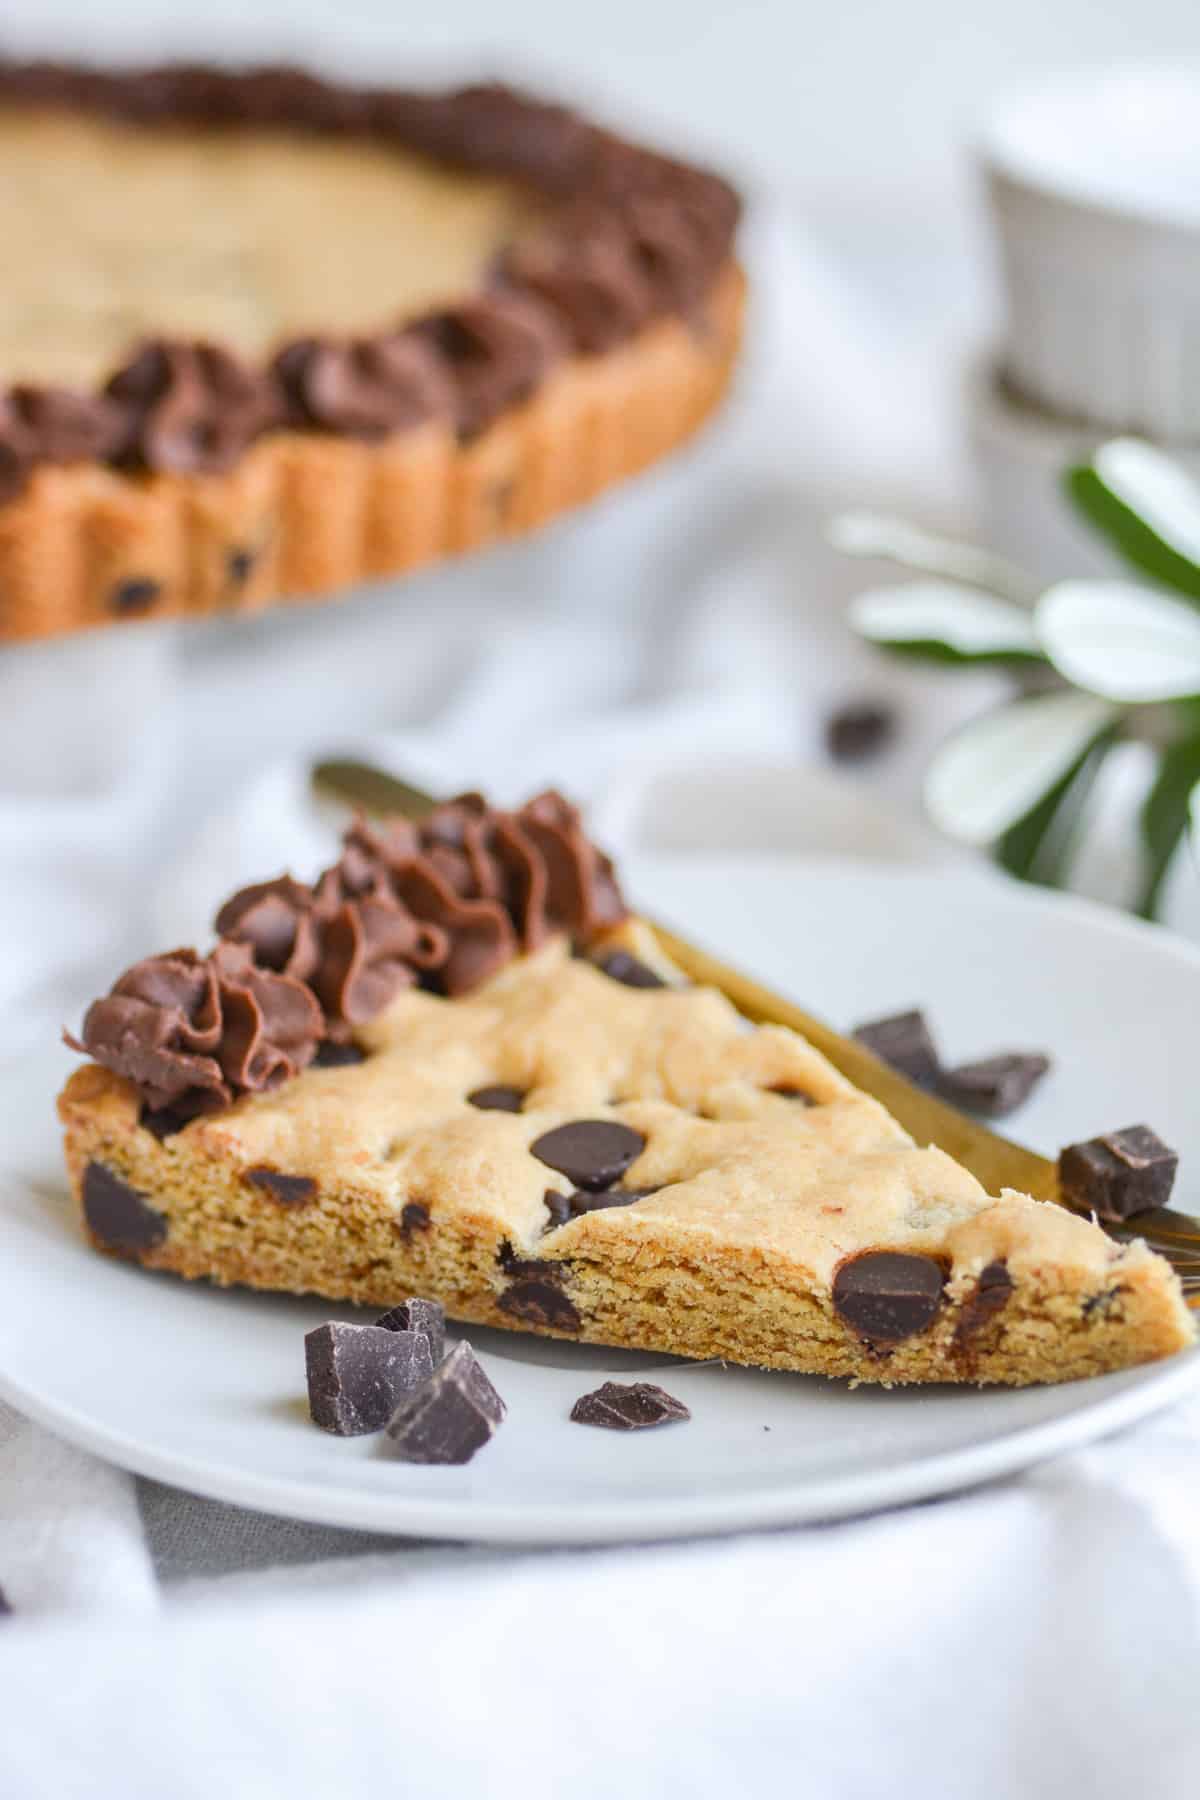 Slice of Vegan Cookie cake on a plate on a white cloth